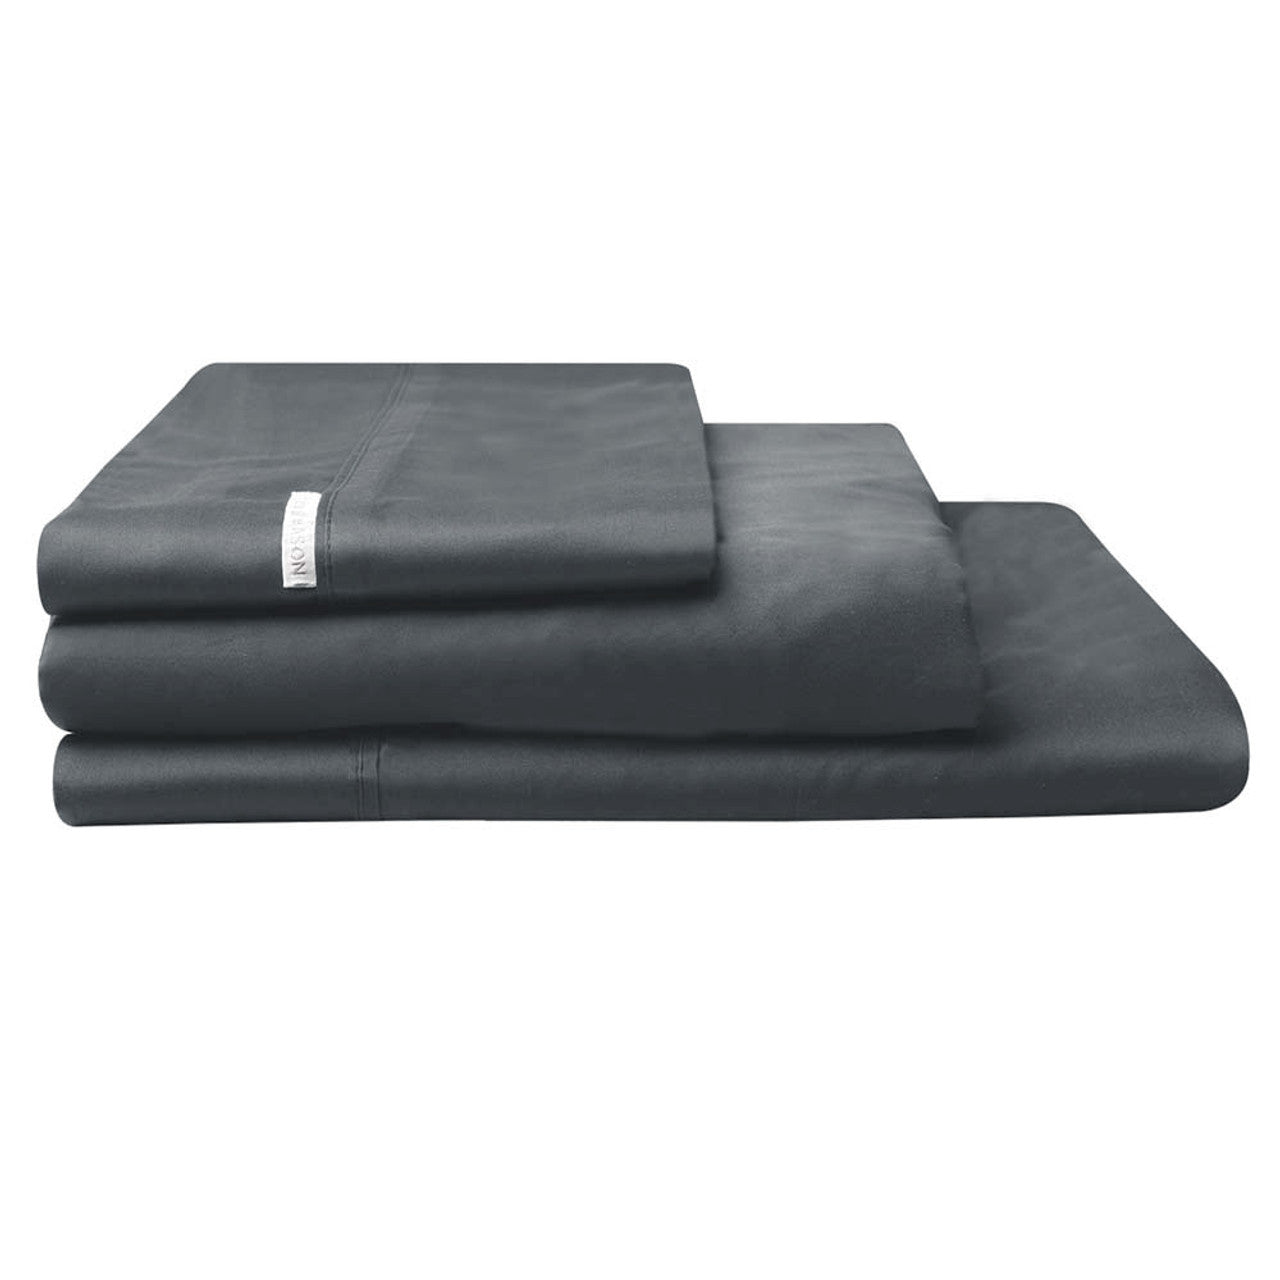 The Logan and Mason 300TC Cotton Percale Charcoal Bed Sheet Set is made from cotton, known for its natural breathability